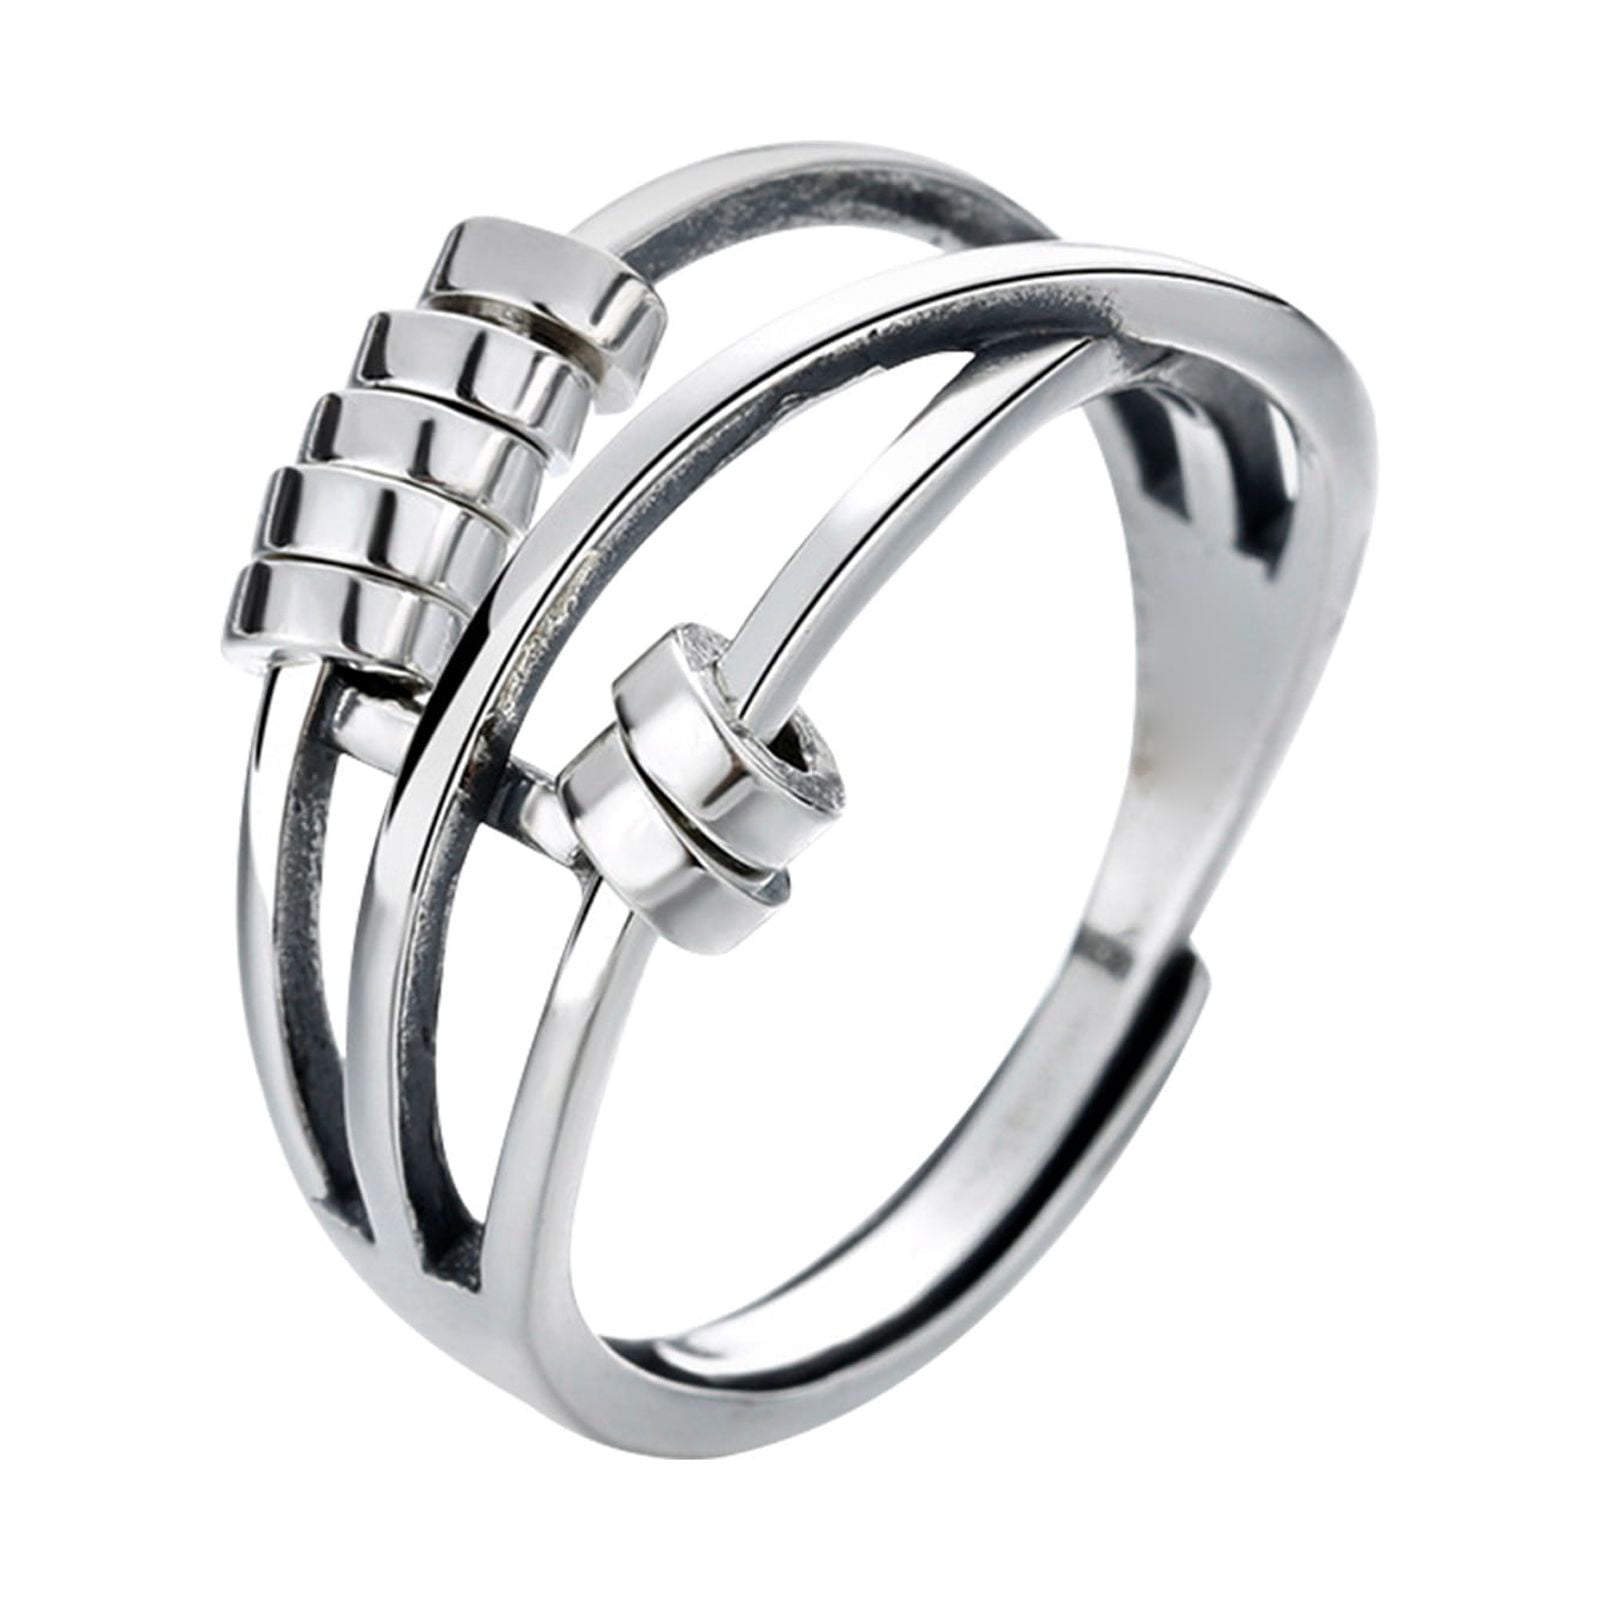 Best Fidget Rings 2021: Spinner Rings on Amazon for Stress, Anxiety